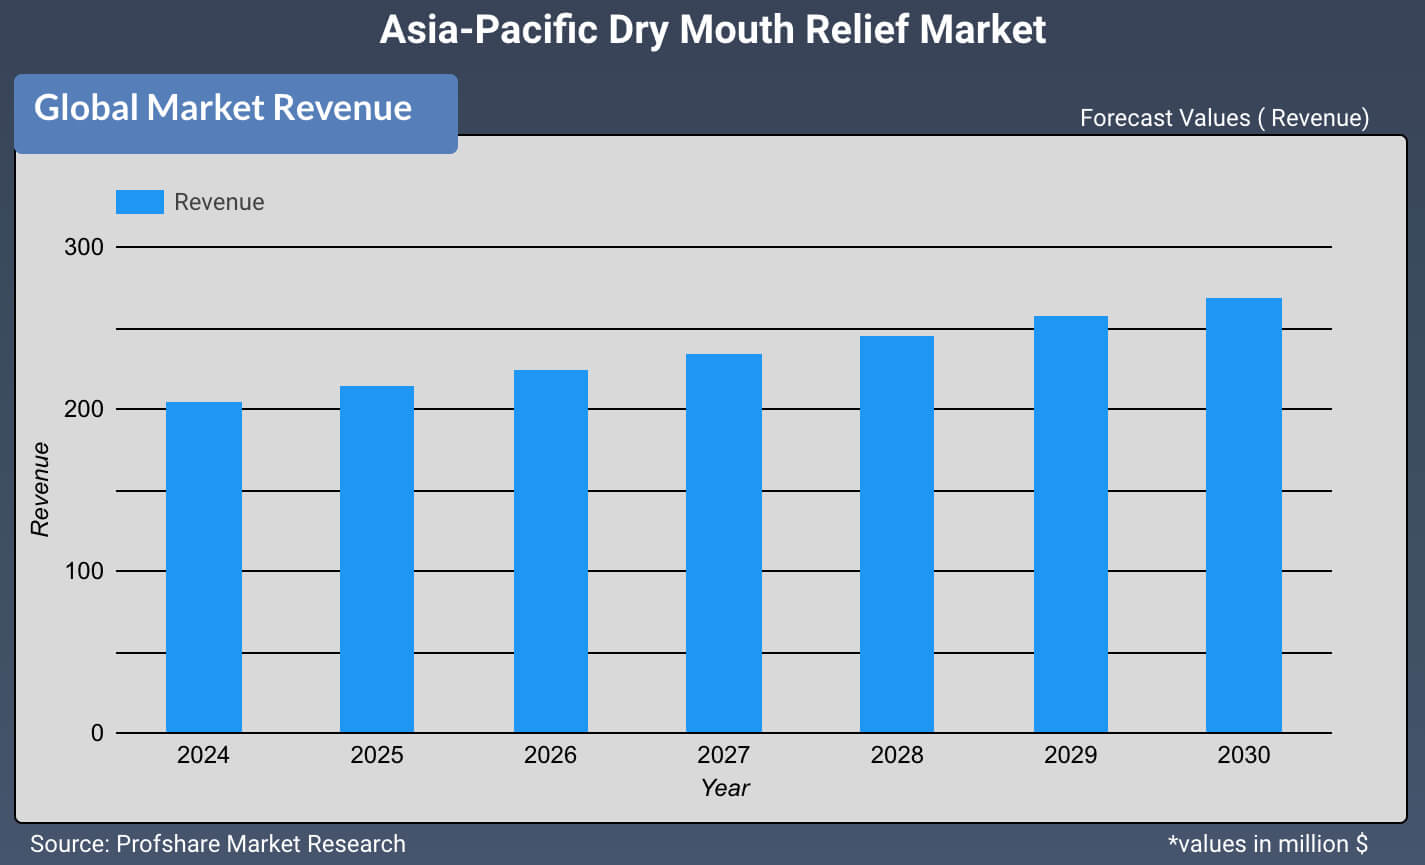 Asia-Pacific Dry Mouth Relief Market